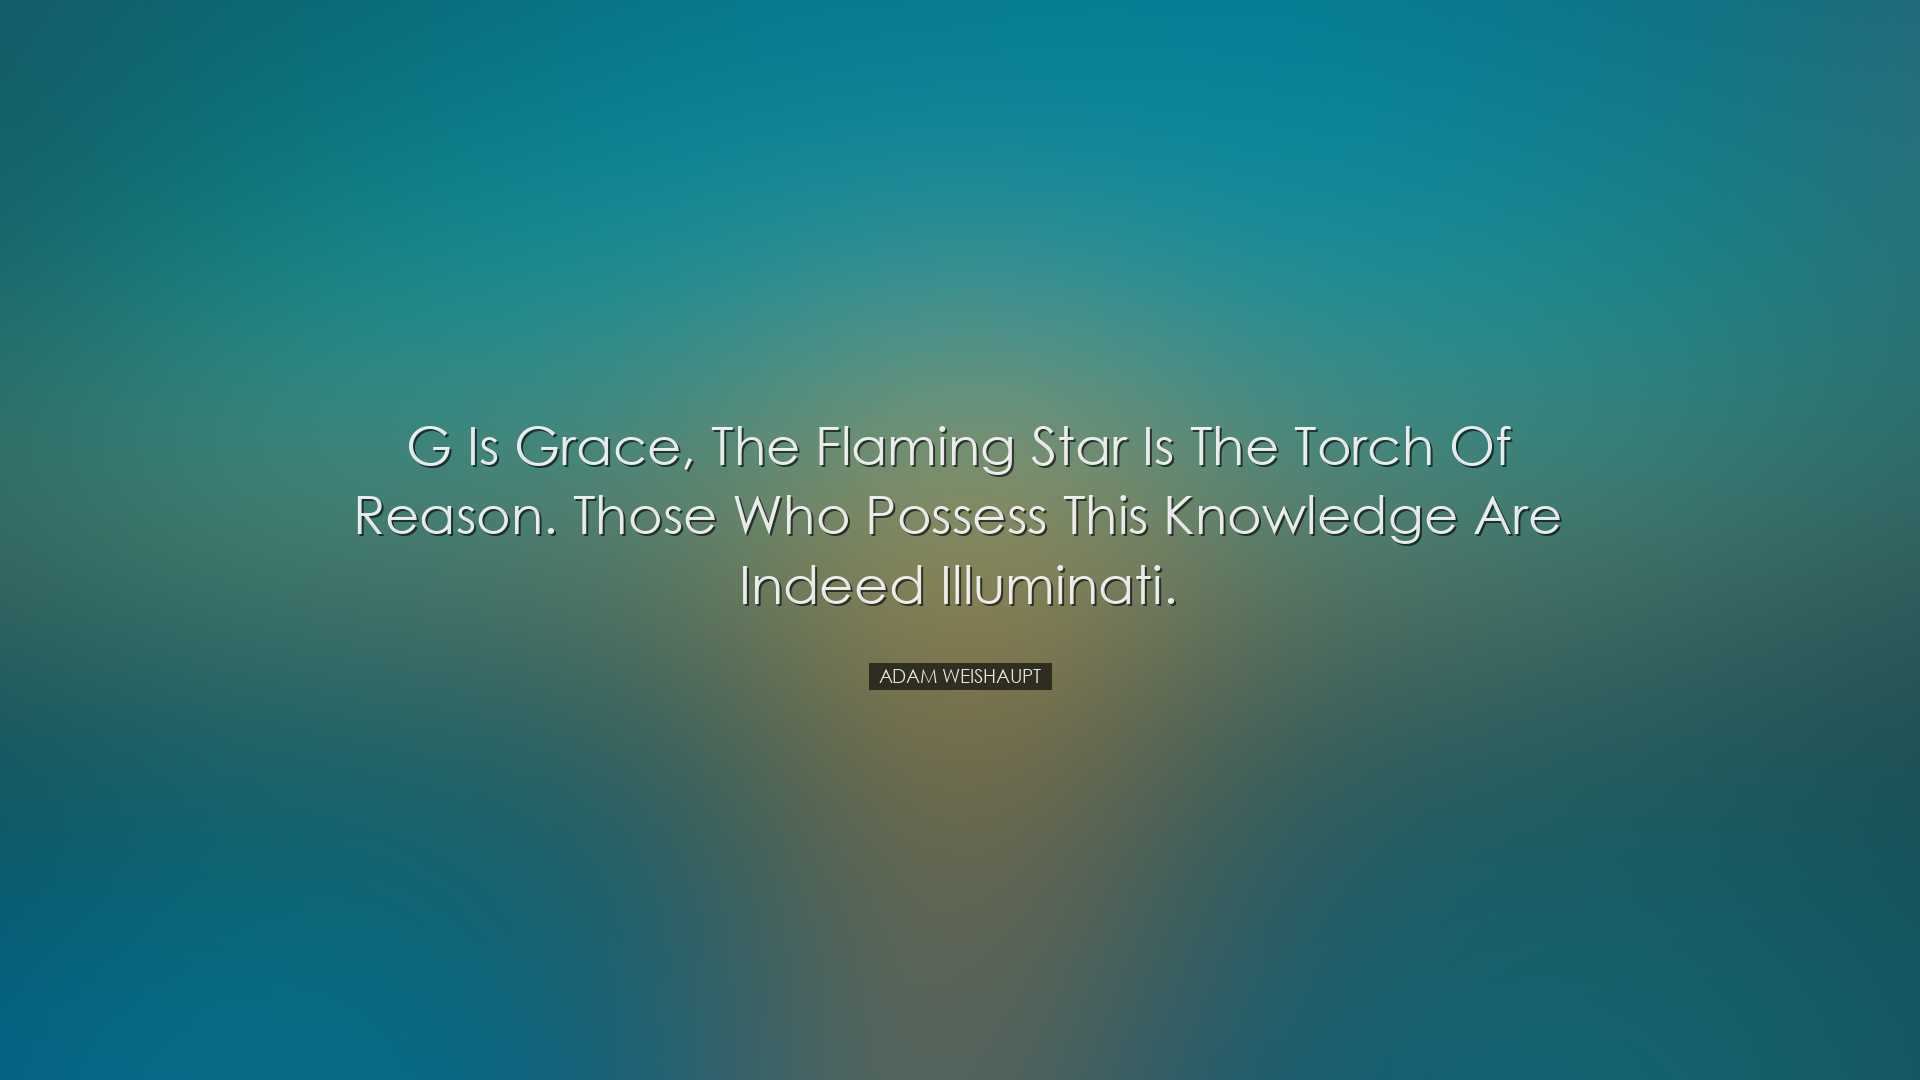 G is Grace, the Flaming Star is the Torch of Reason. Those who pos